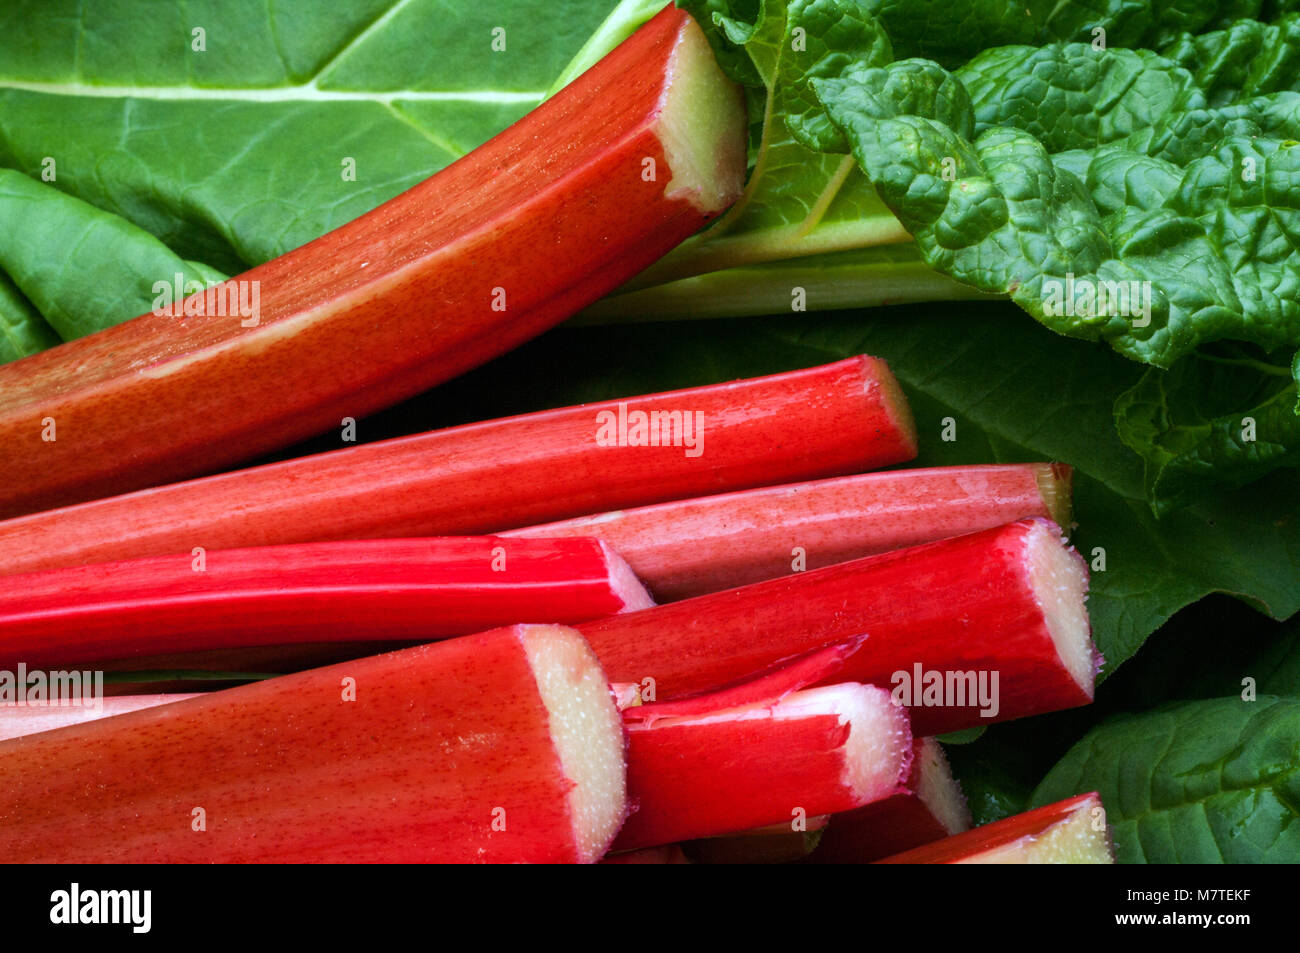 Rhubarb End on that has just been picked and cut from an urban garden Stock Photo